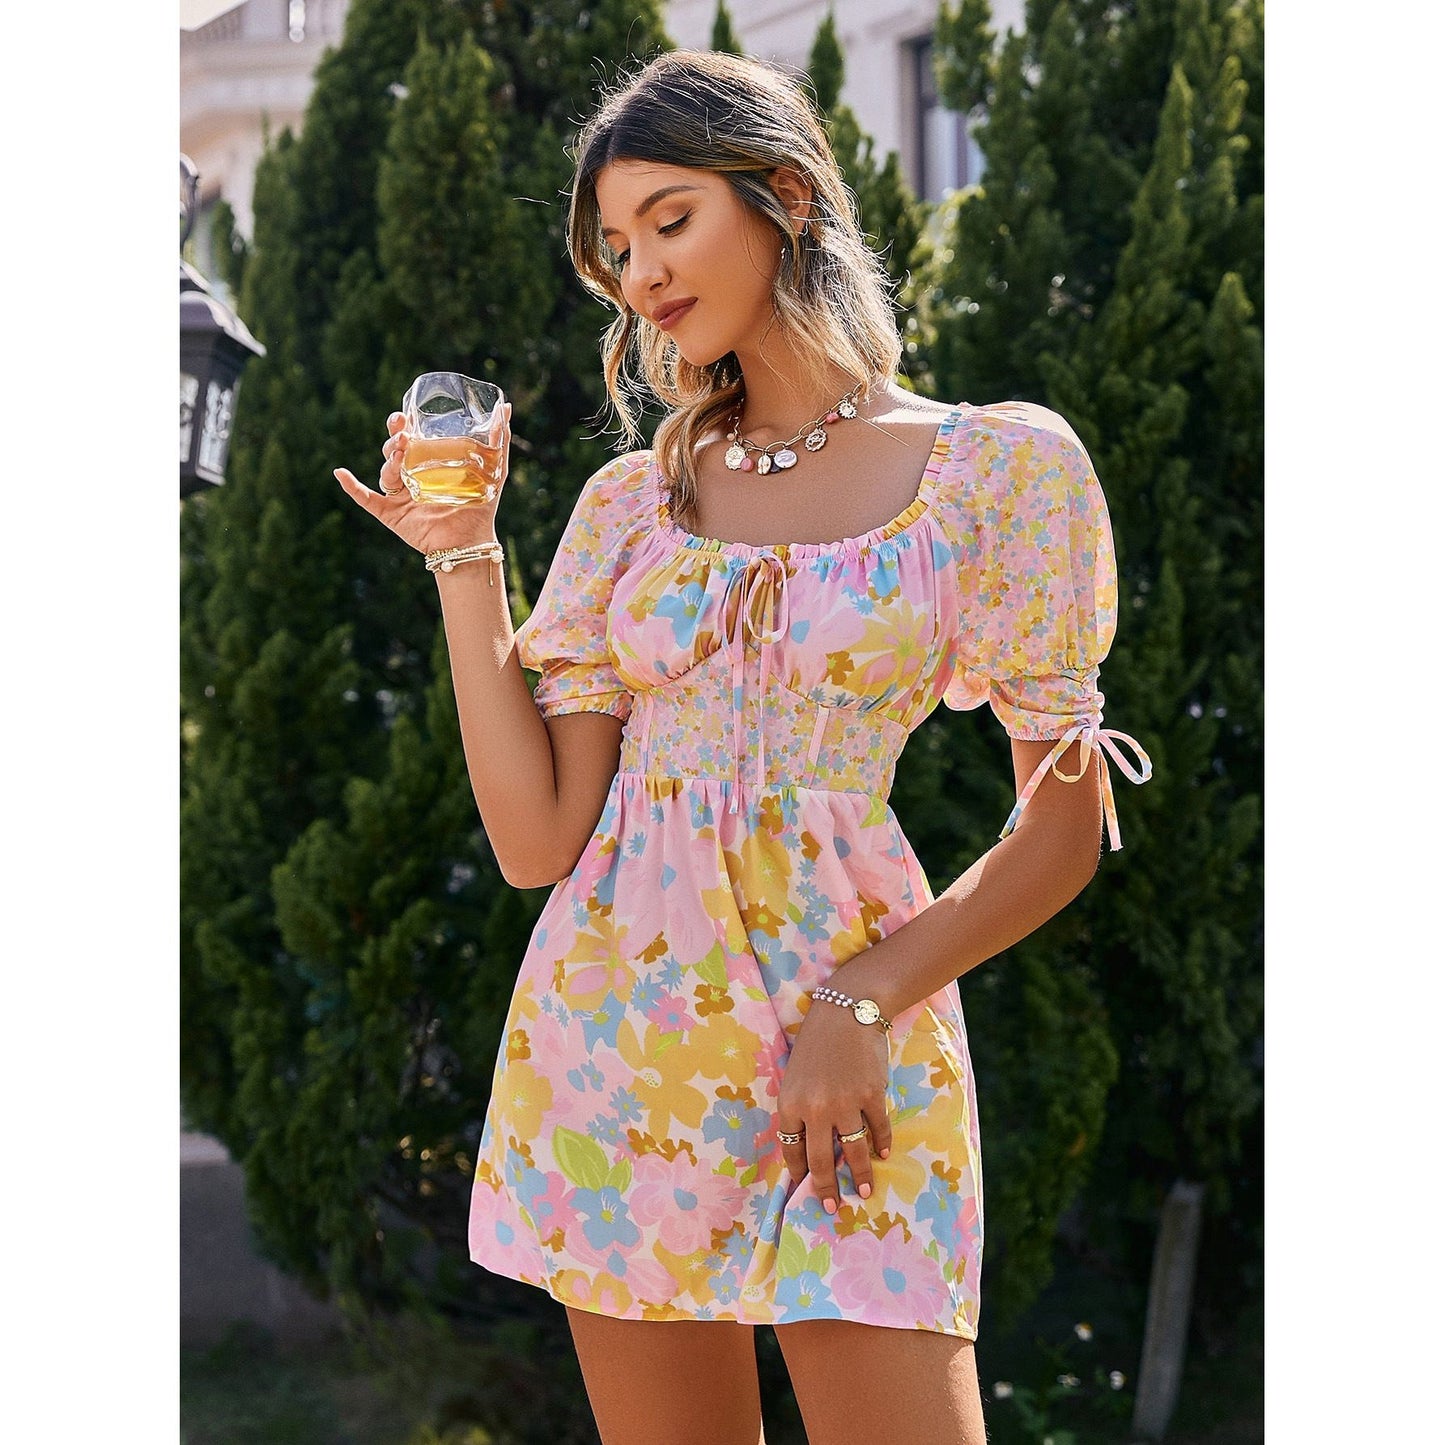 Buy Online Premimum Quality, Trendy and Highly Comfortable Spring And Summer Printed Frock - FEYONAS